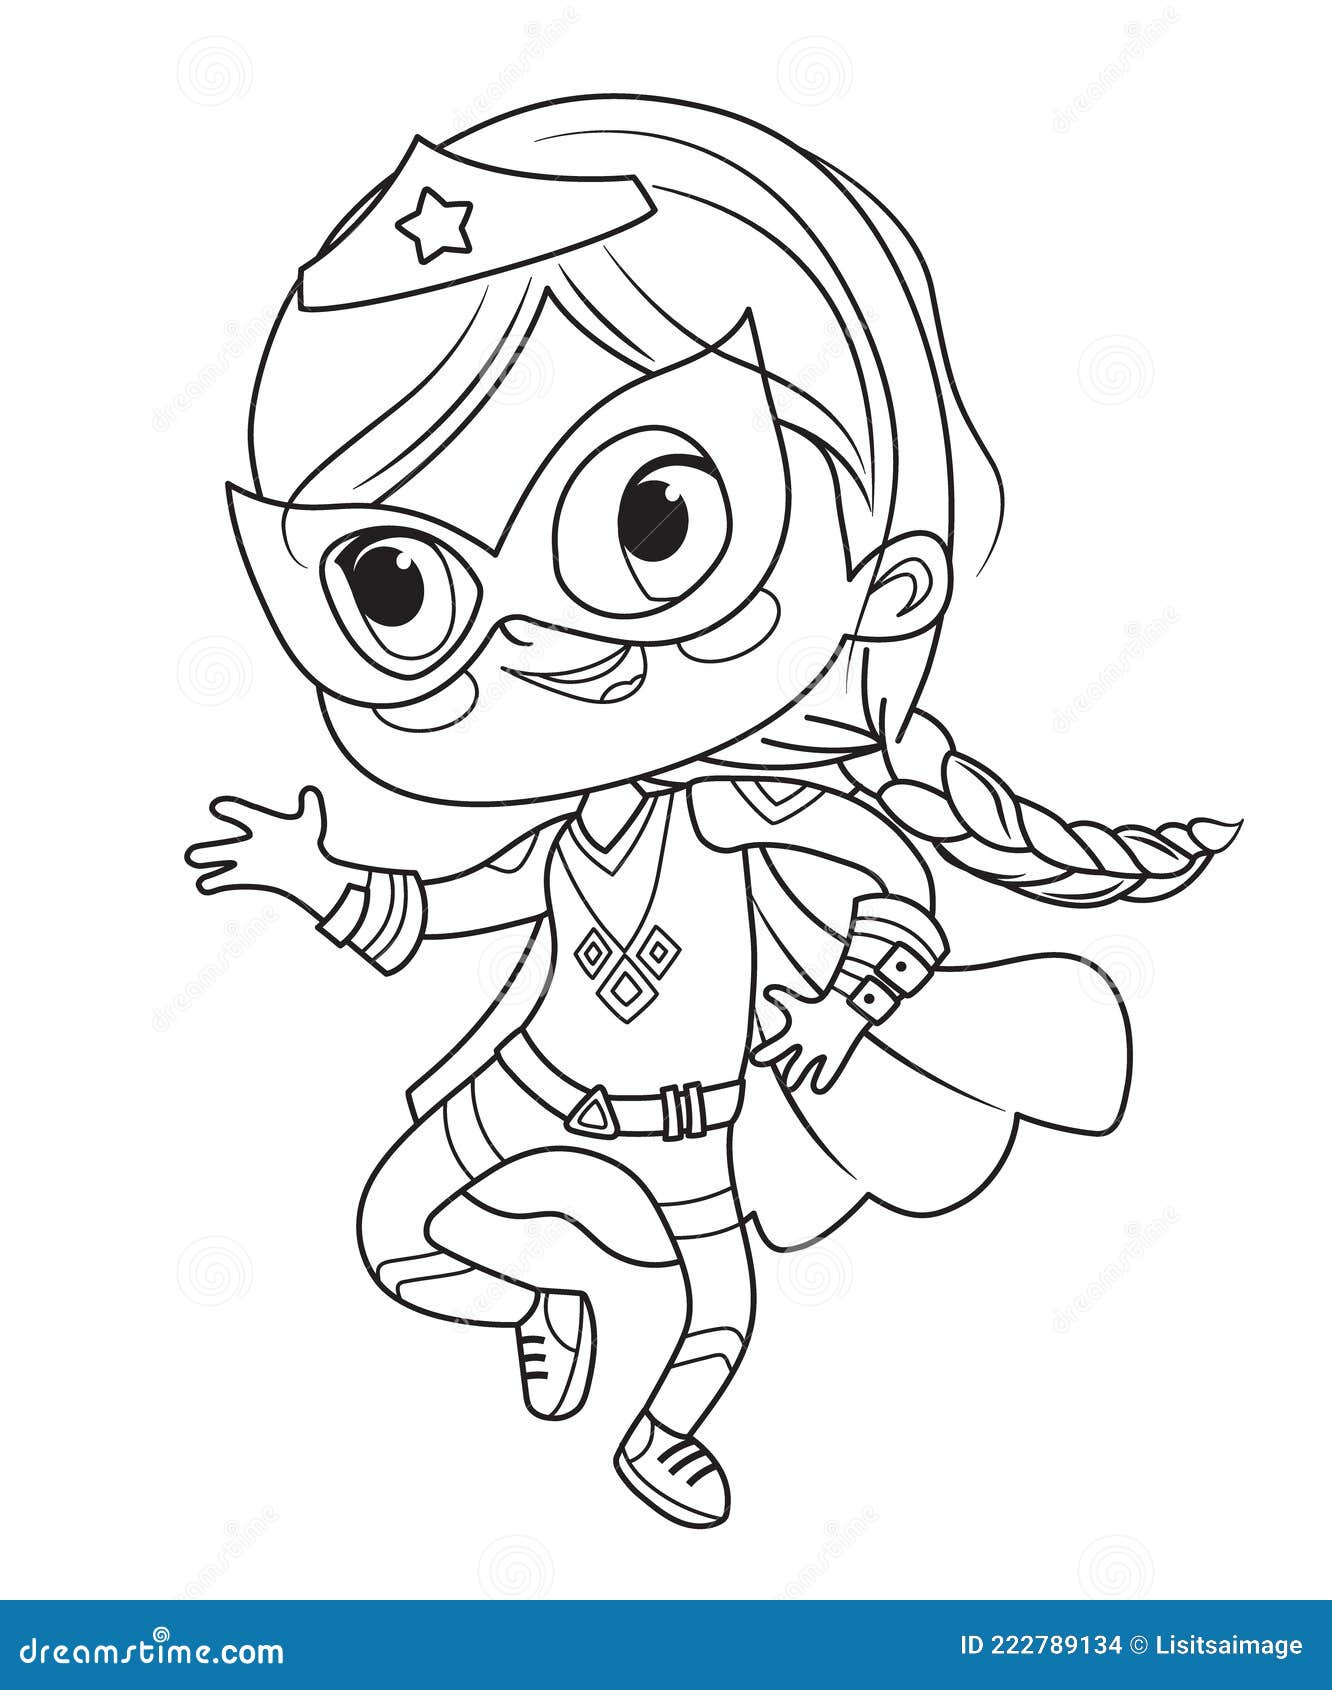 Coloring Page Of Super Hero Children Boys And Girls Wearing Costumes Of Superheroes Coloring Book Cartoon Vector Stock Vector Illustration Of Costume Character 222789134